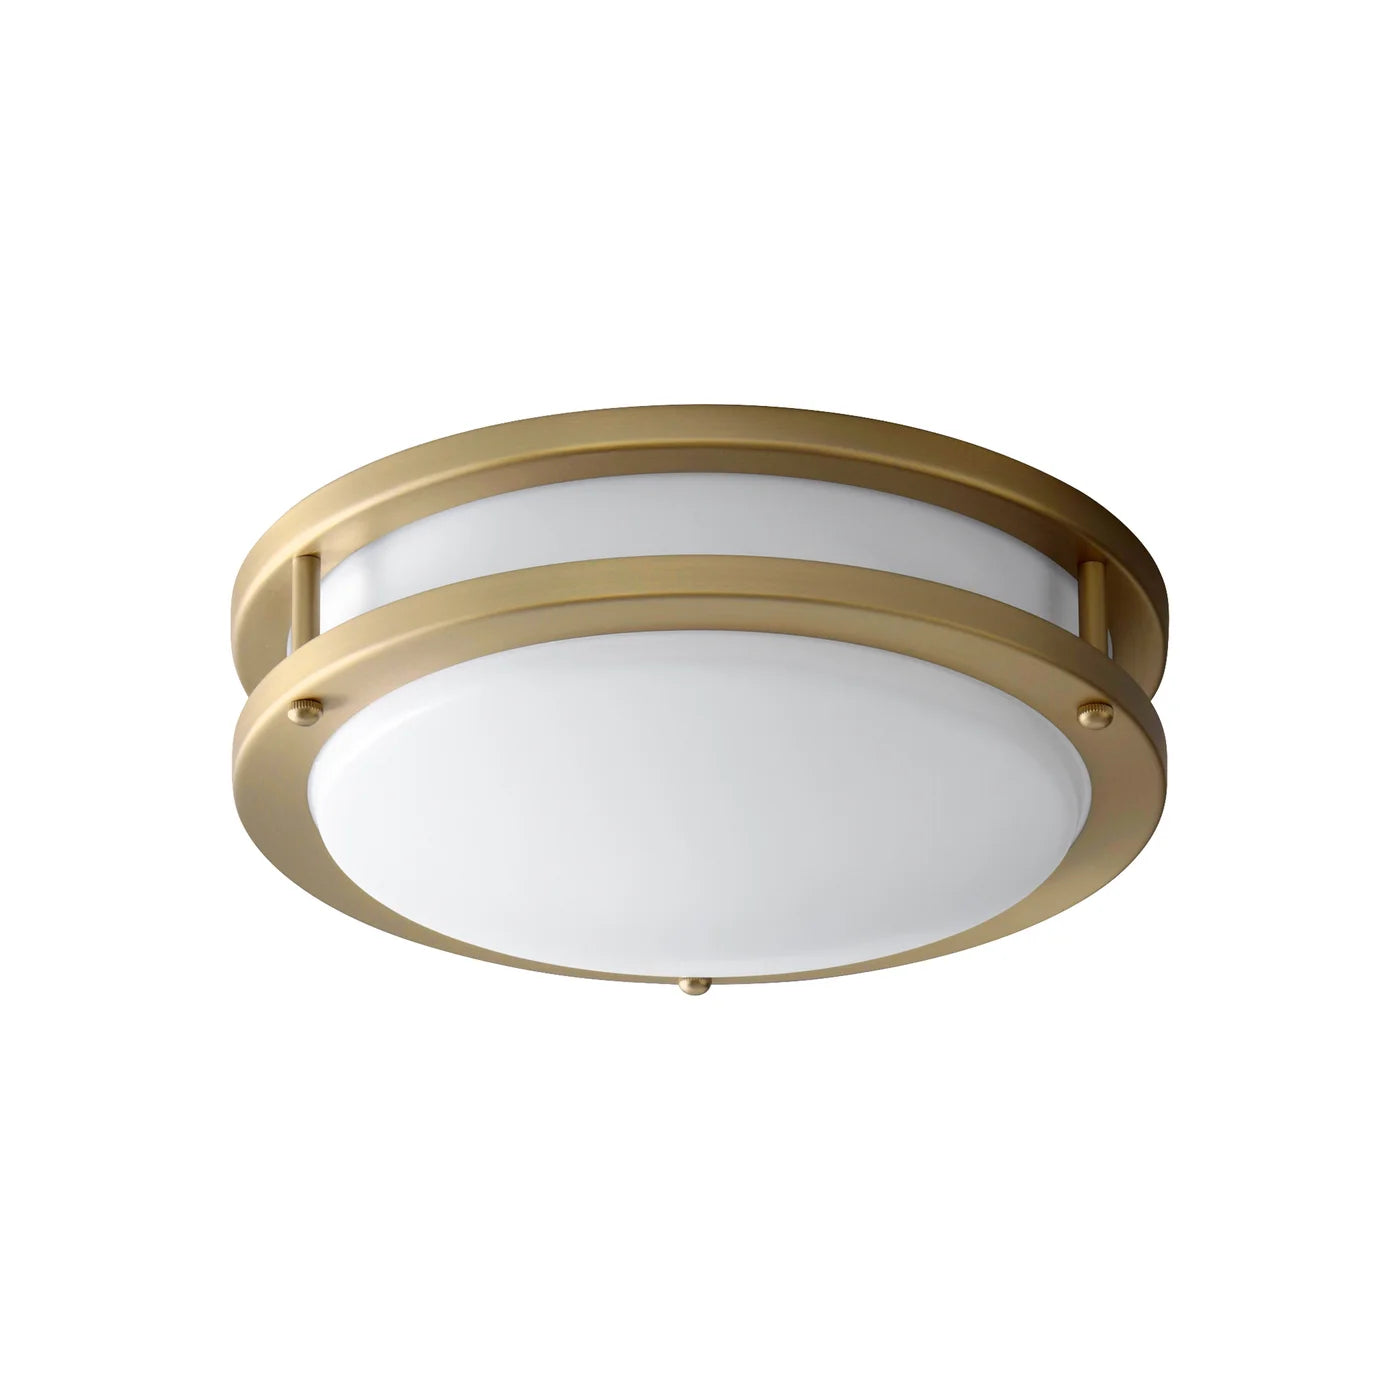 Oxygen Oracle 3-618-40 Flush LED Ceiling Mount Light, ADA Compliant, Damp Rated - Aged Brass